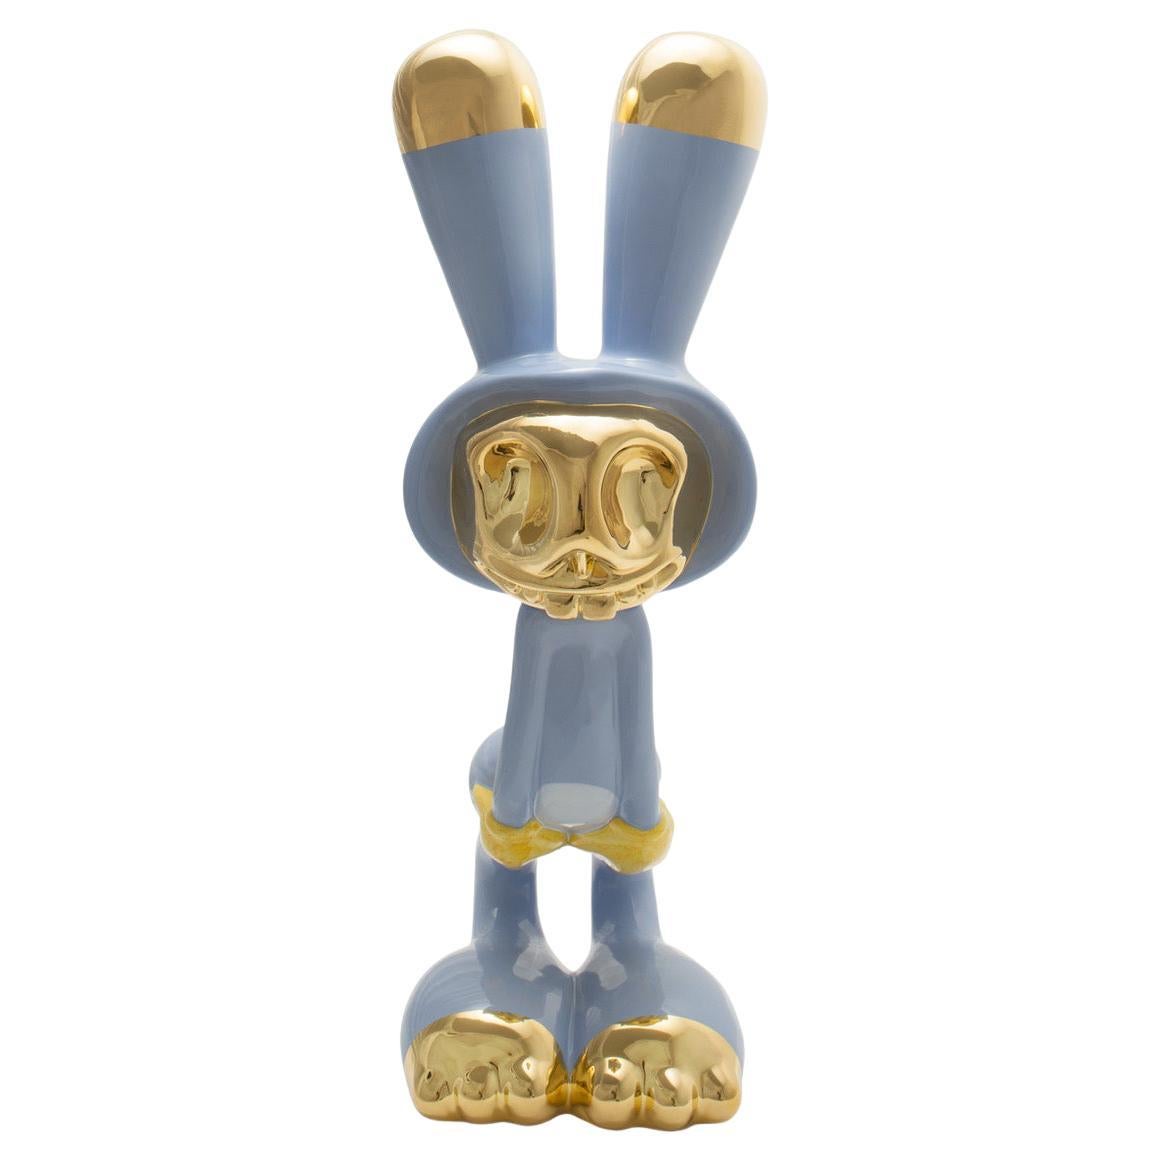 Coniglieschio Ceramic Sculpture by Massimo Giacon for Superego Editions, Italy For Sale